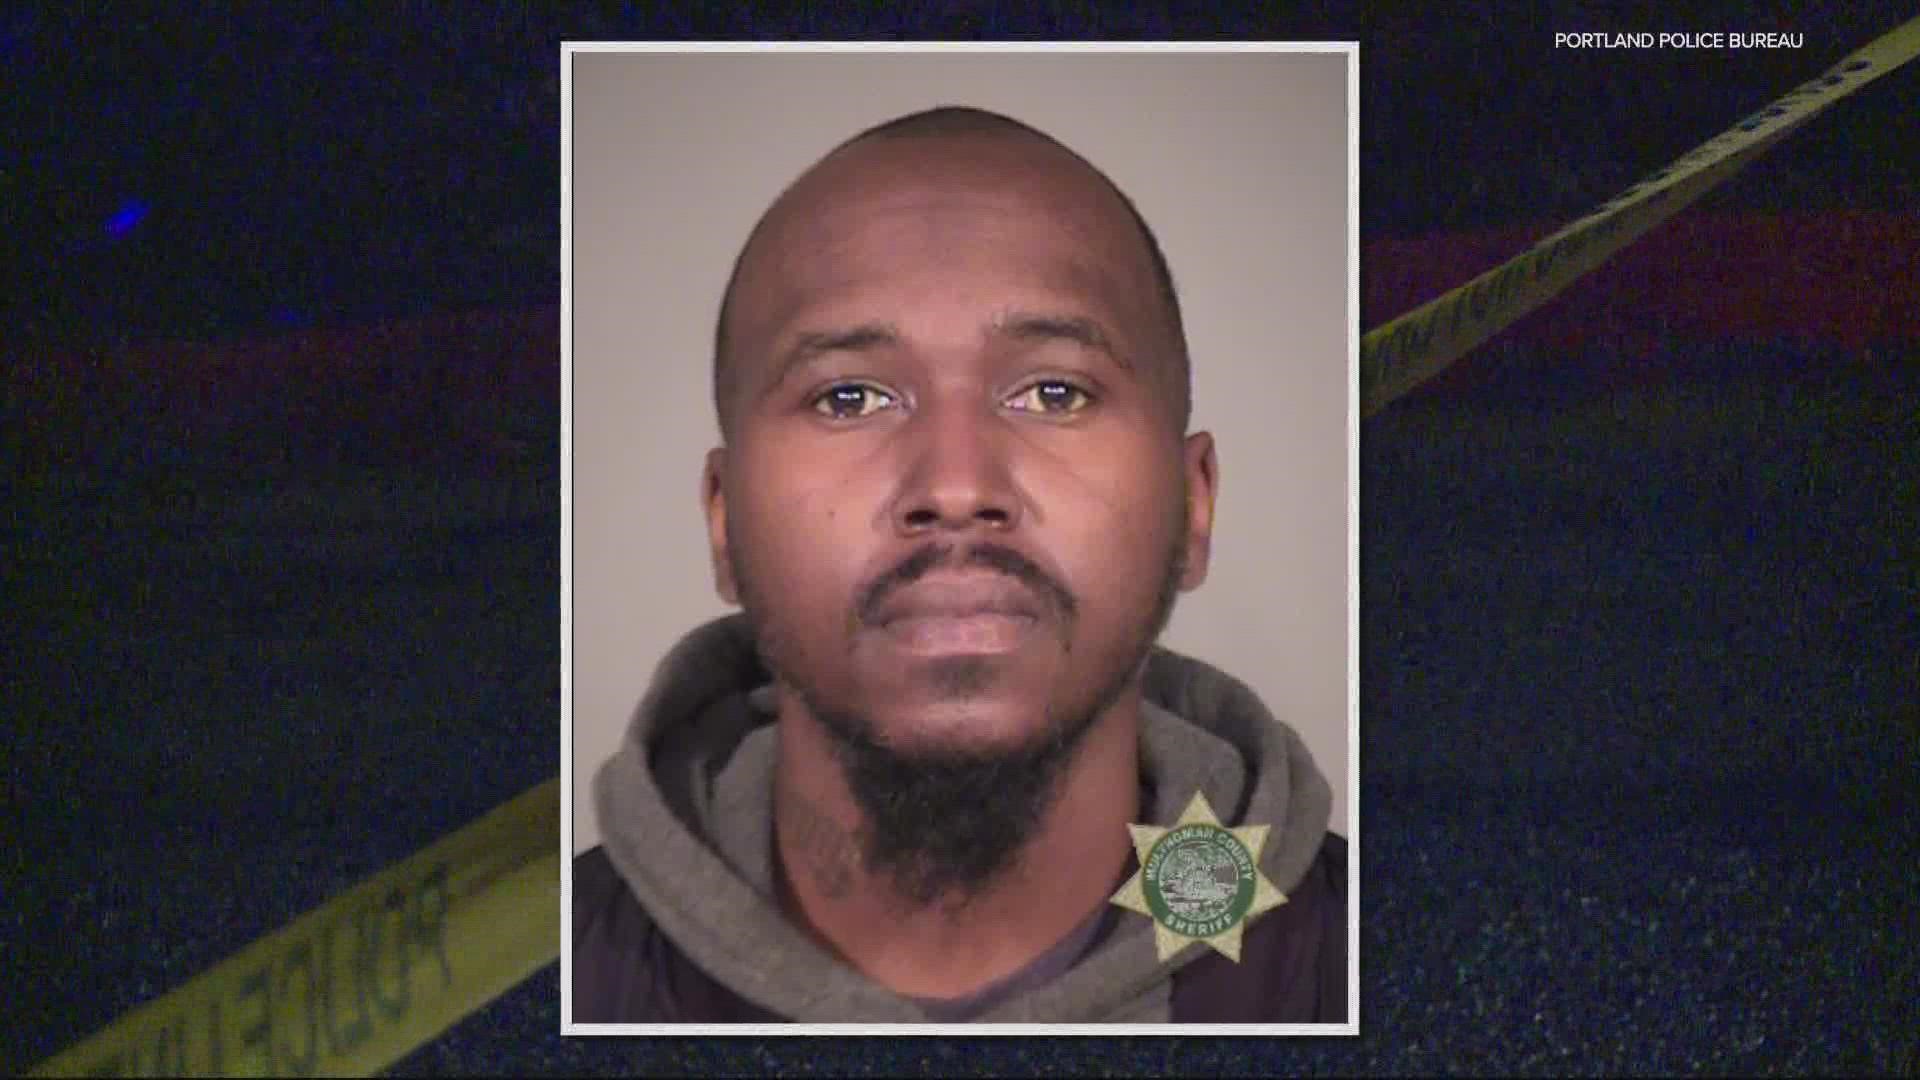 Witnesses identified the suspect in a Tuesday shooting on East Burnside Street and Southeast 160th Avenue as 36-year-old Rashad Calbert, Portland police said.